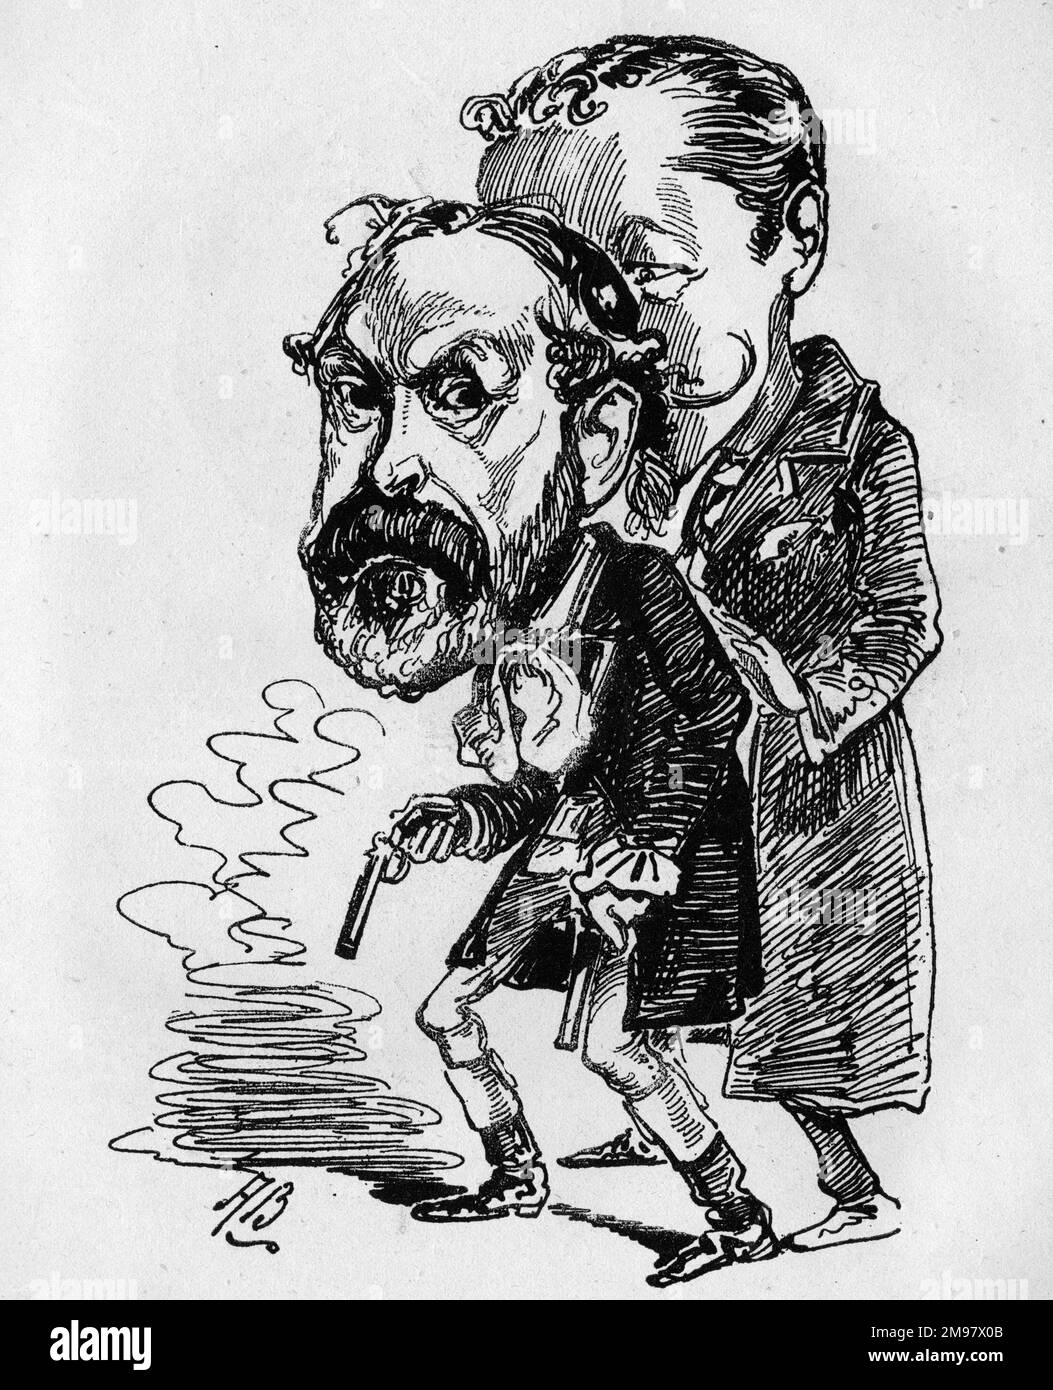 Cartoon, Henry Du Pre Labouchere (1831-1912), English politician, writer, publisher and theatre owner. A commentary on a libel case between Henry Labouchere, the proprietor and editor of Truth magazine, and Edward Levy-Lawson of the Daily Telegraph. 'Does Mr. Pottinger, or any other sane person, believe that Mr. Labouchere would have risked his life by fighting a duel?' Stock Photo